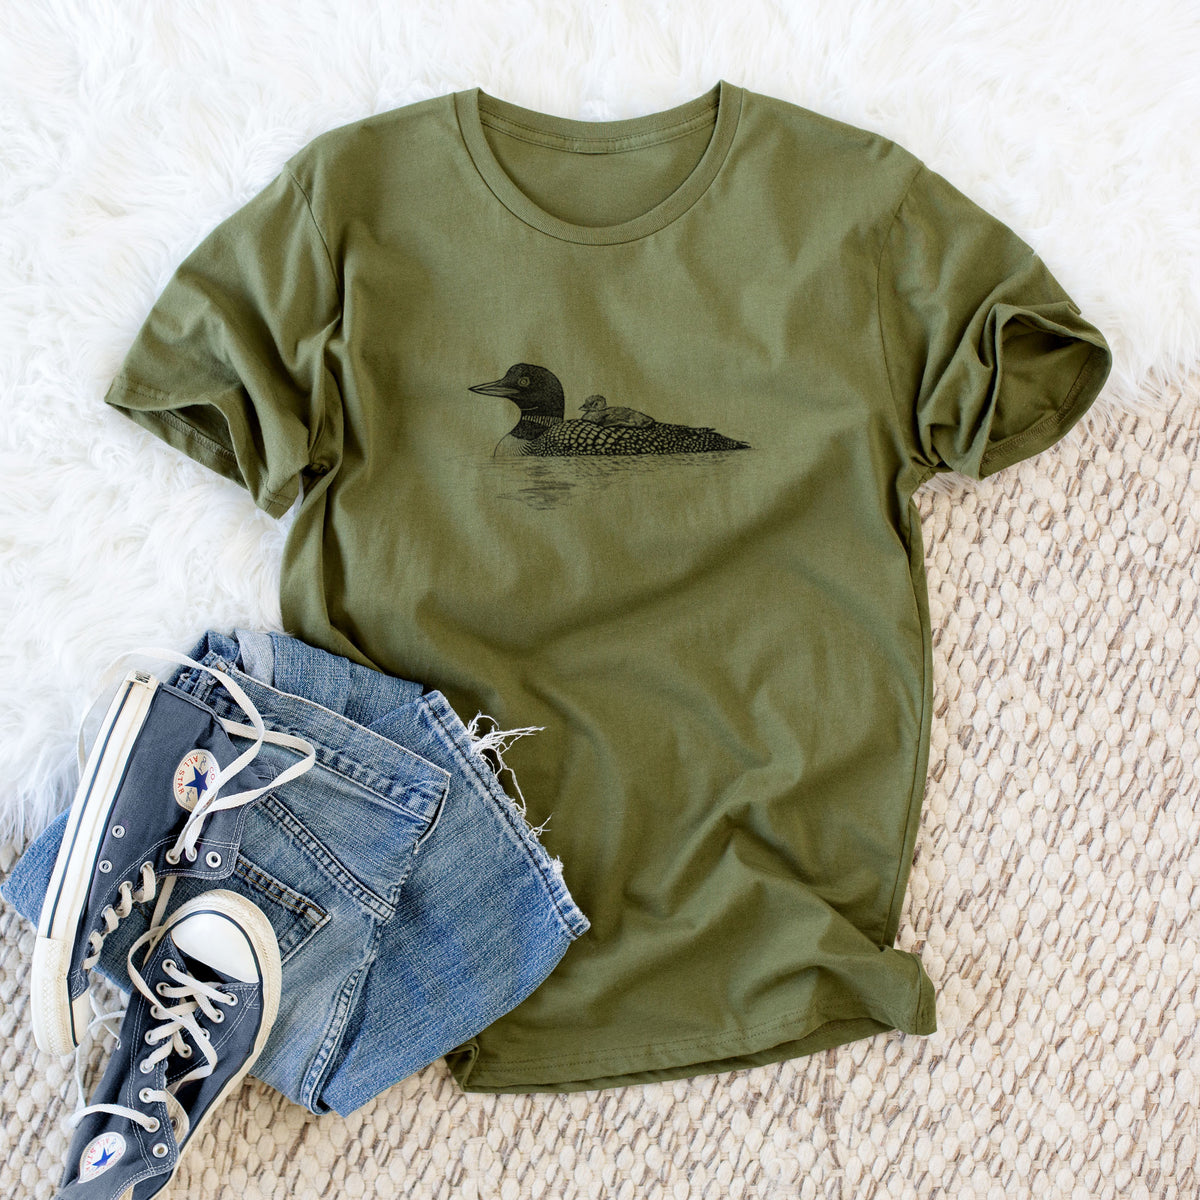 Common Loon with Chick - Gavia immer - Unisex Crewneck - Made in USA - 100% Organic Cotton